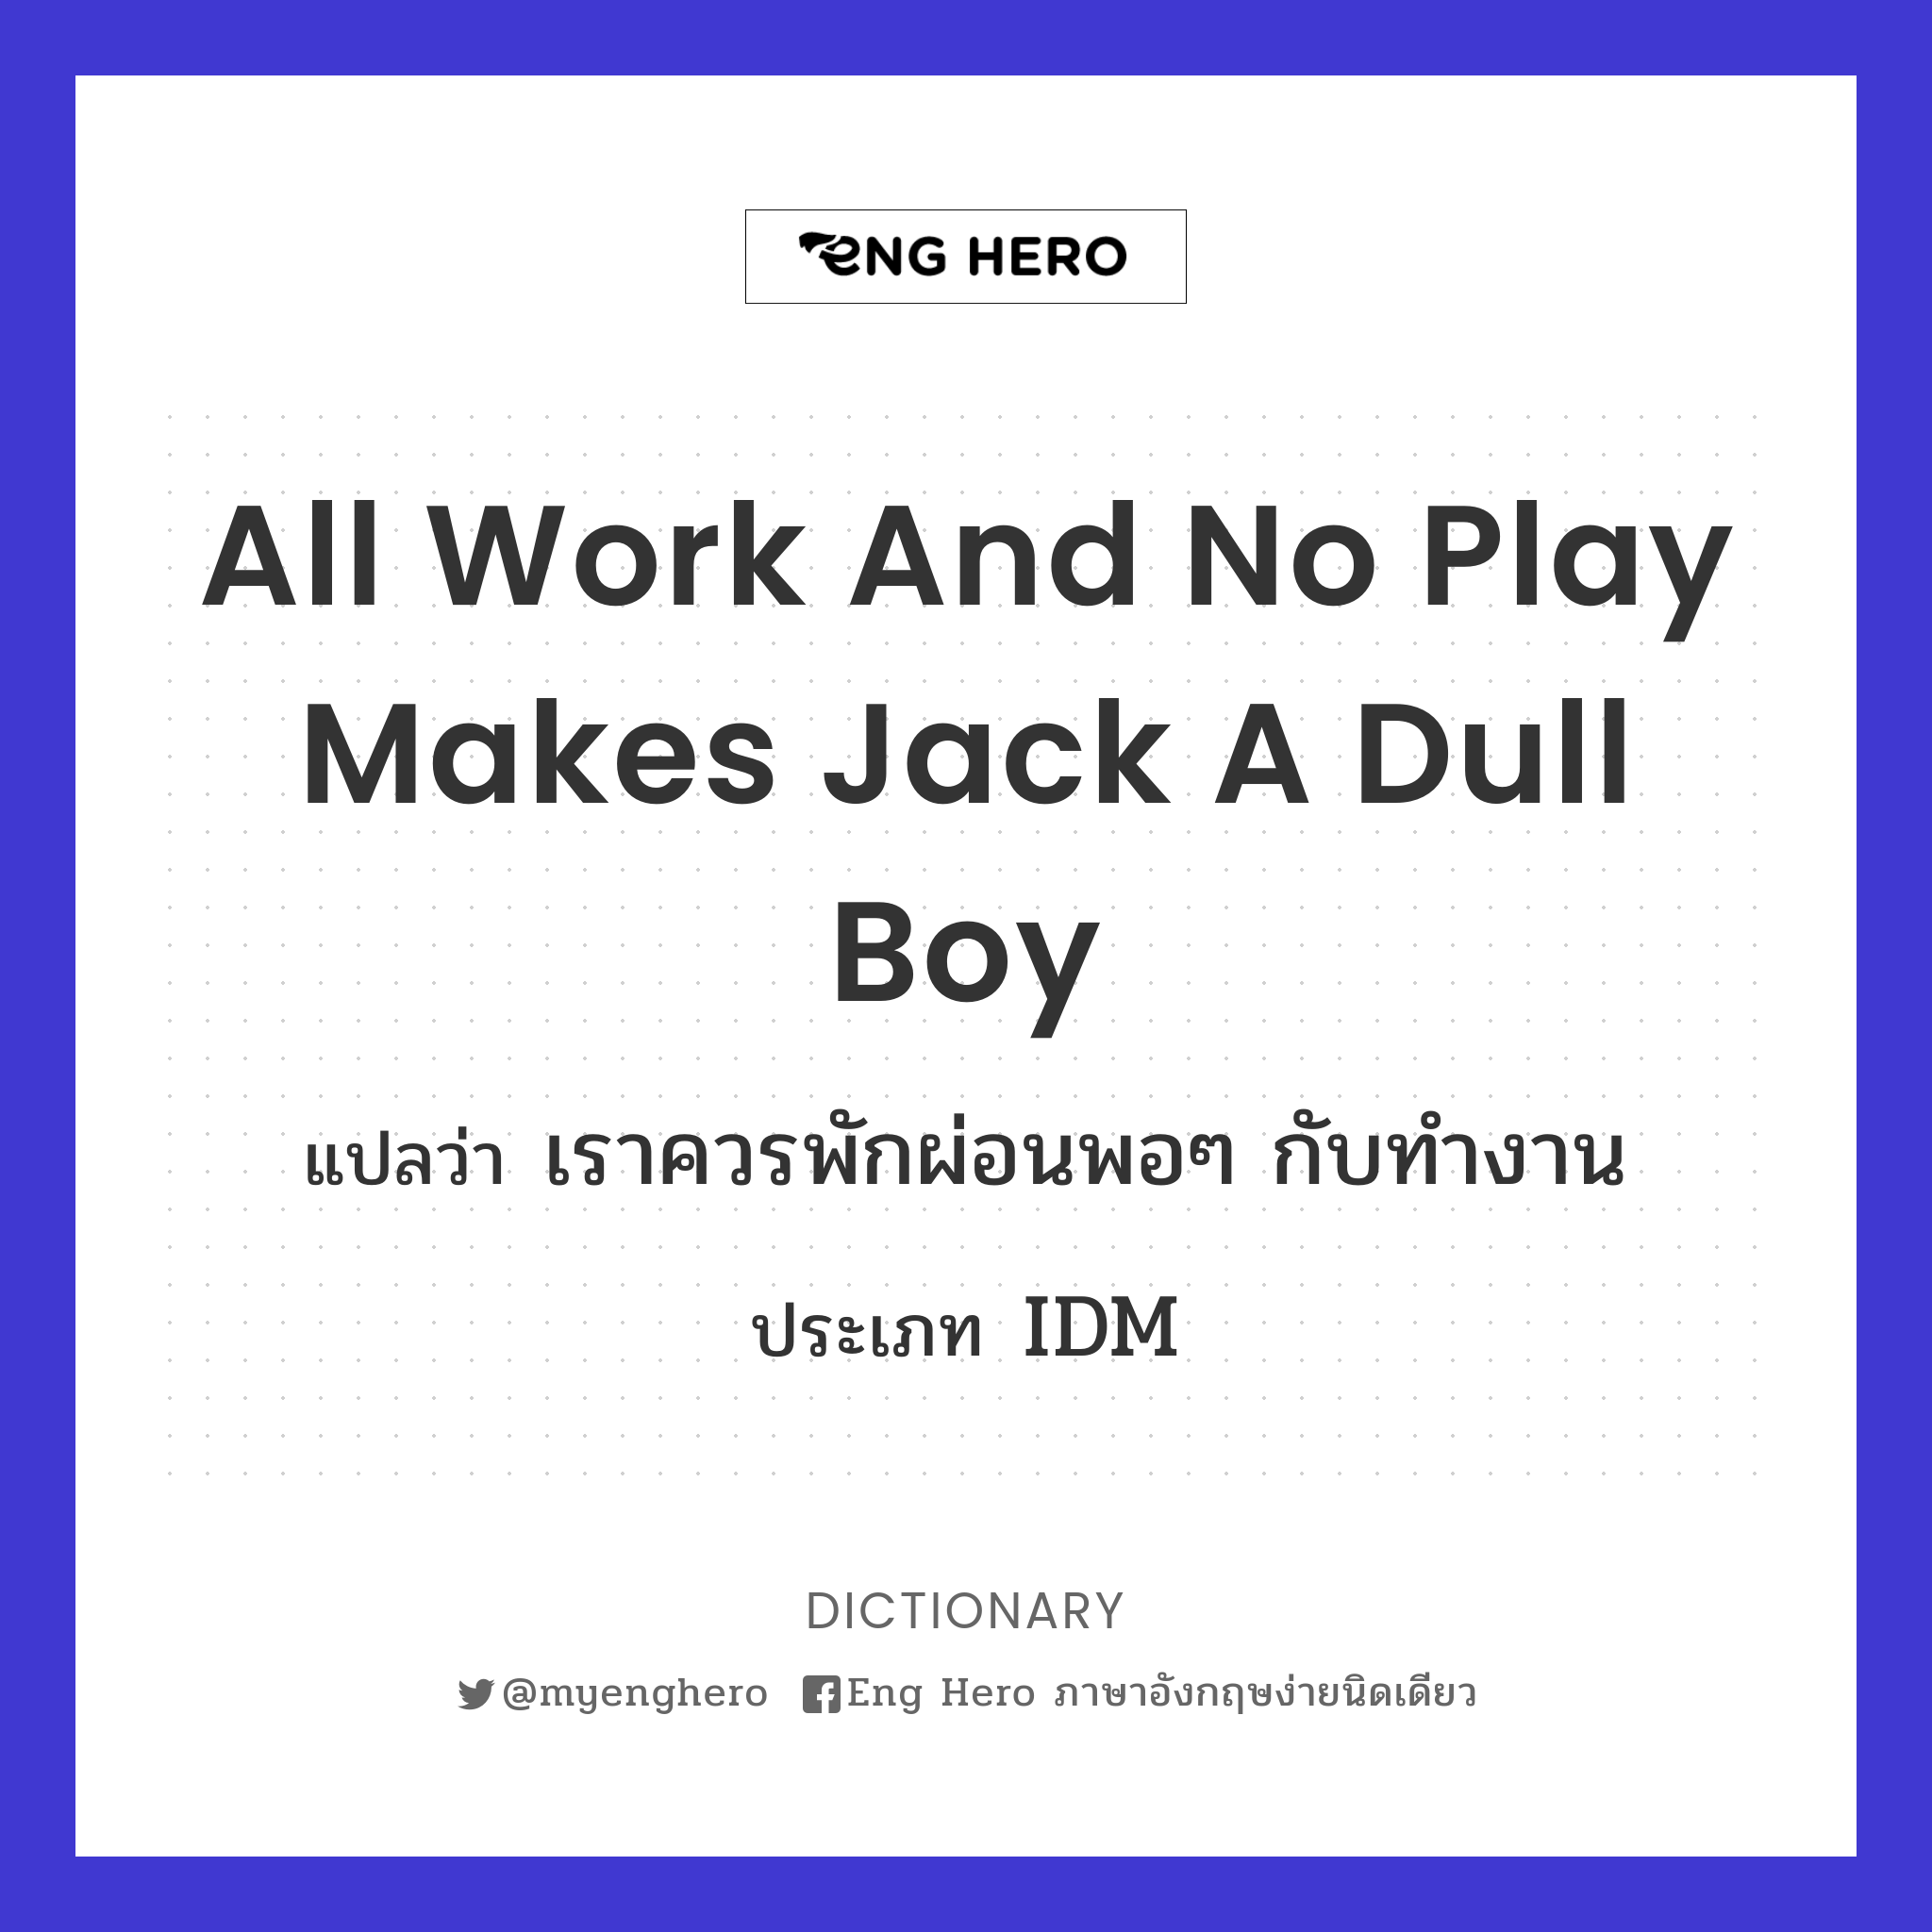 All work and no play makes Jack a dull boy